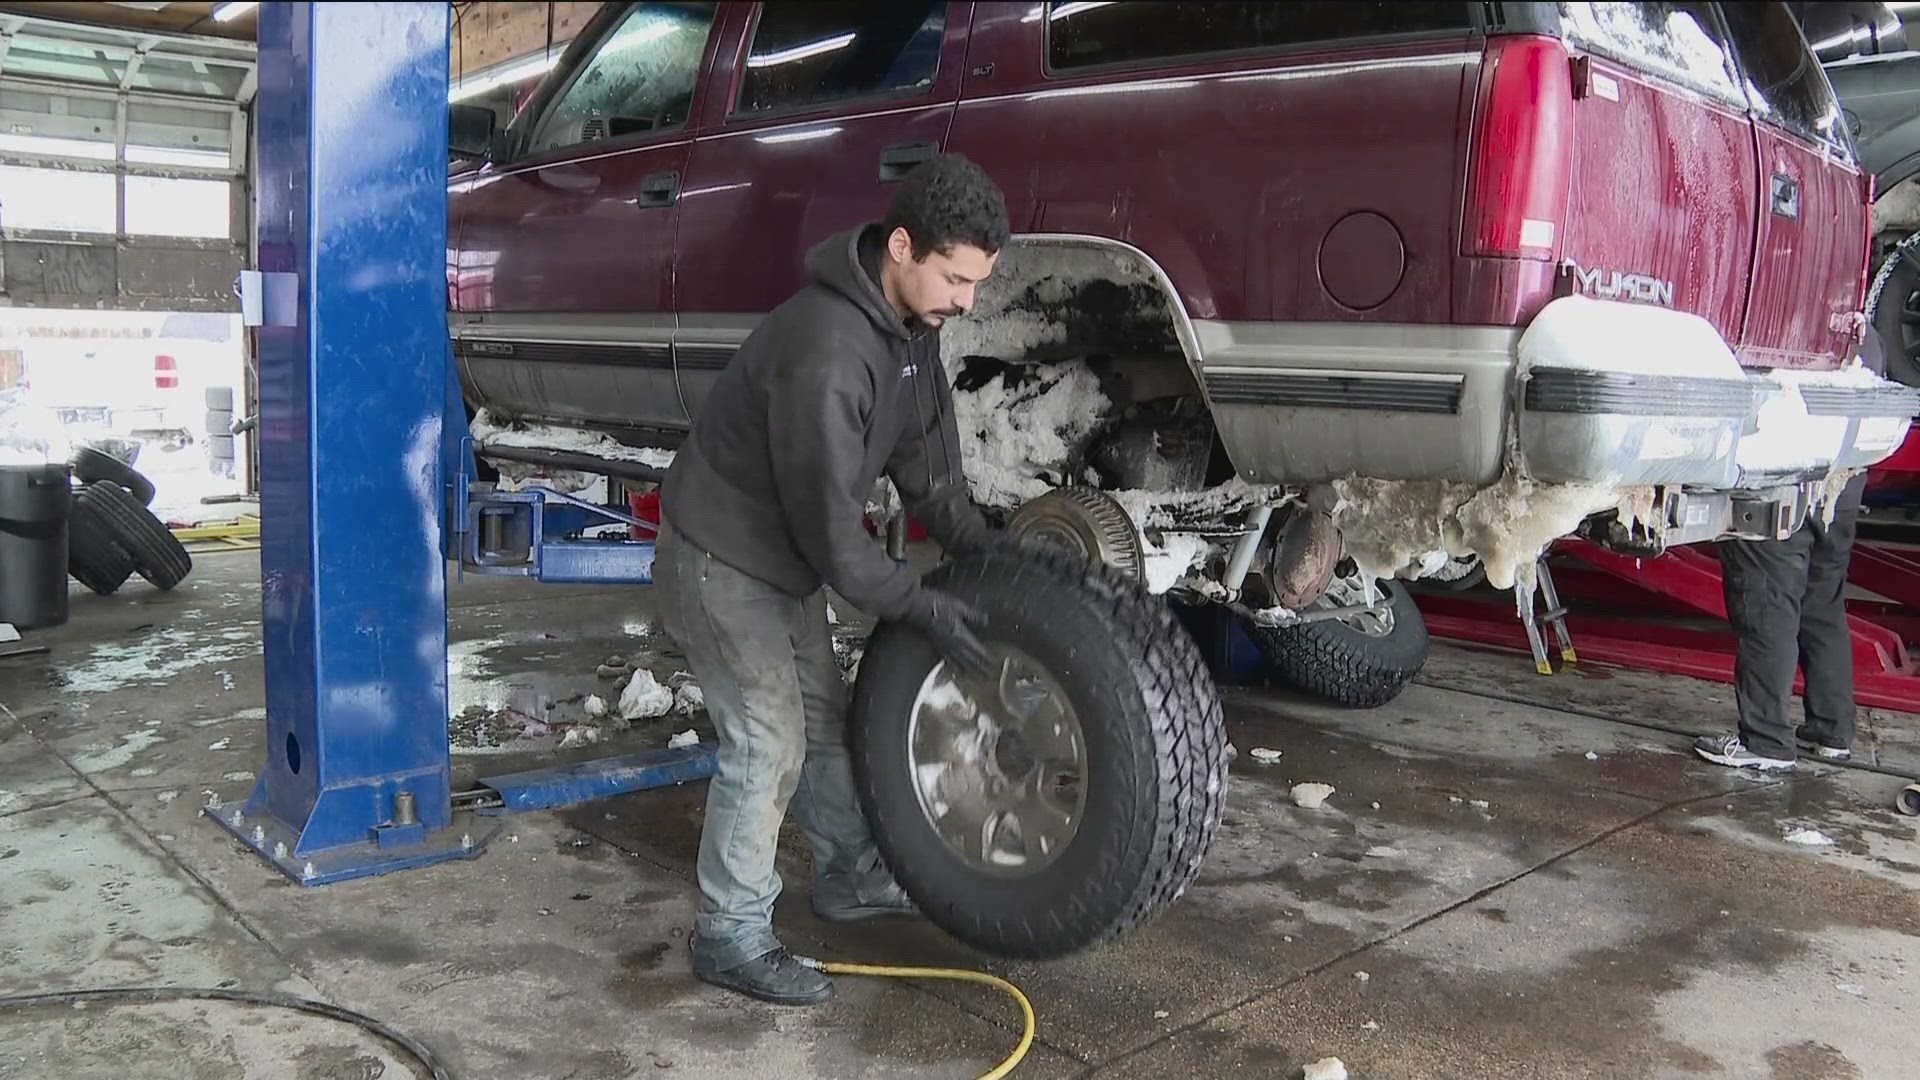 With the Treasure Valley enduring multiple snow storms and roads becoming slippery. Tire shops are working overtime to meet the demand for snow tires.